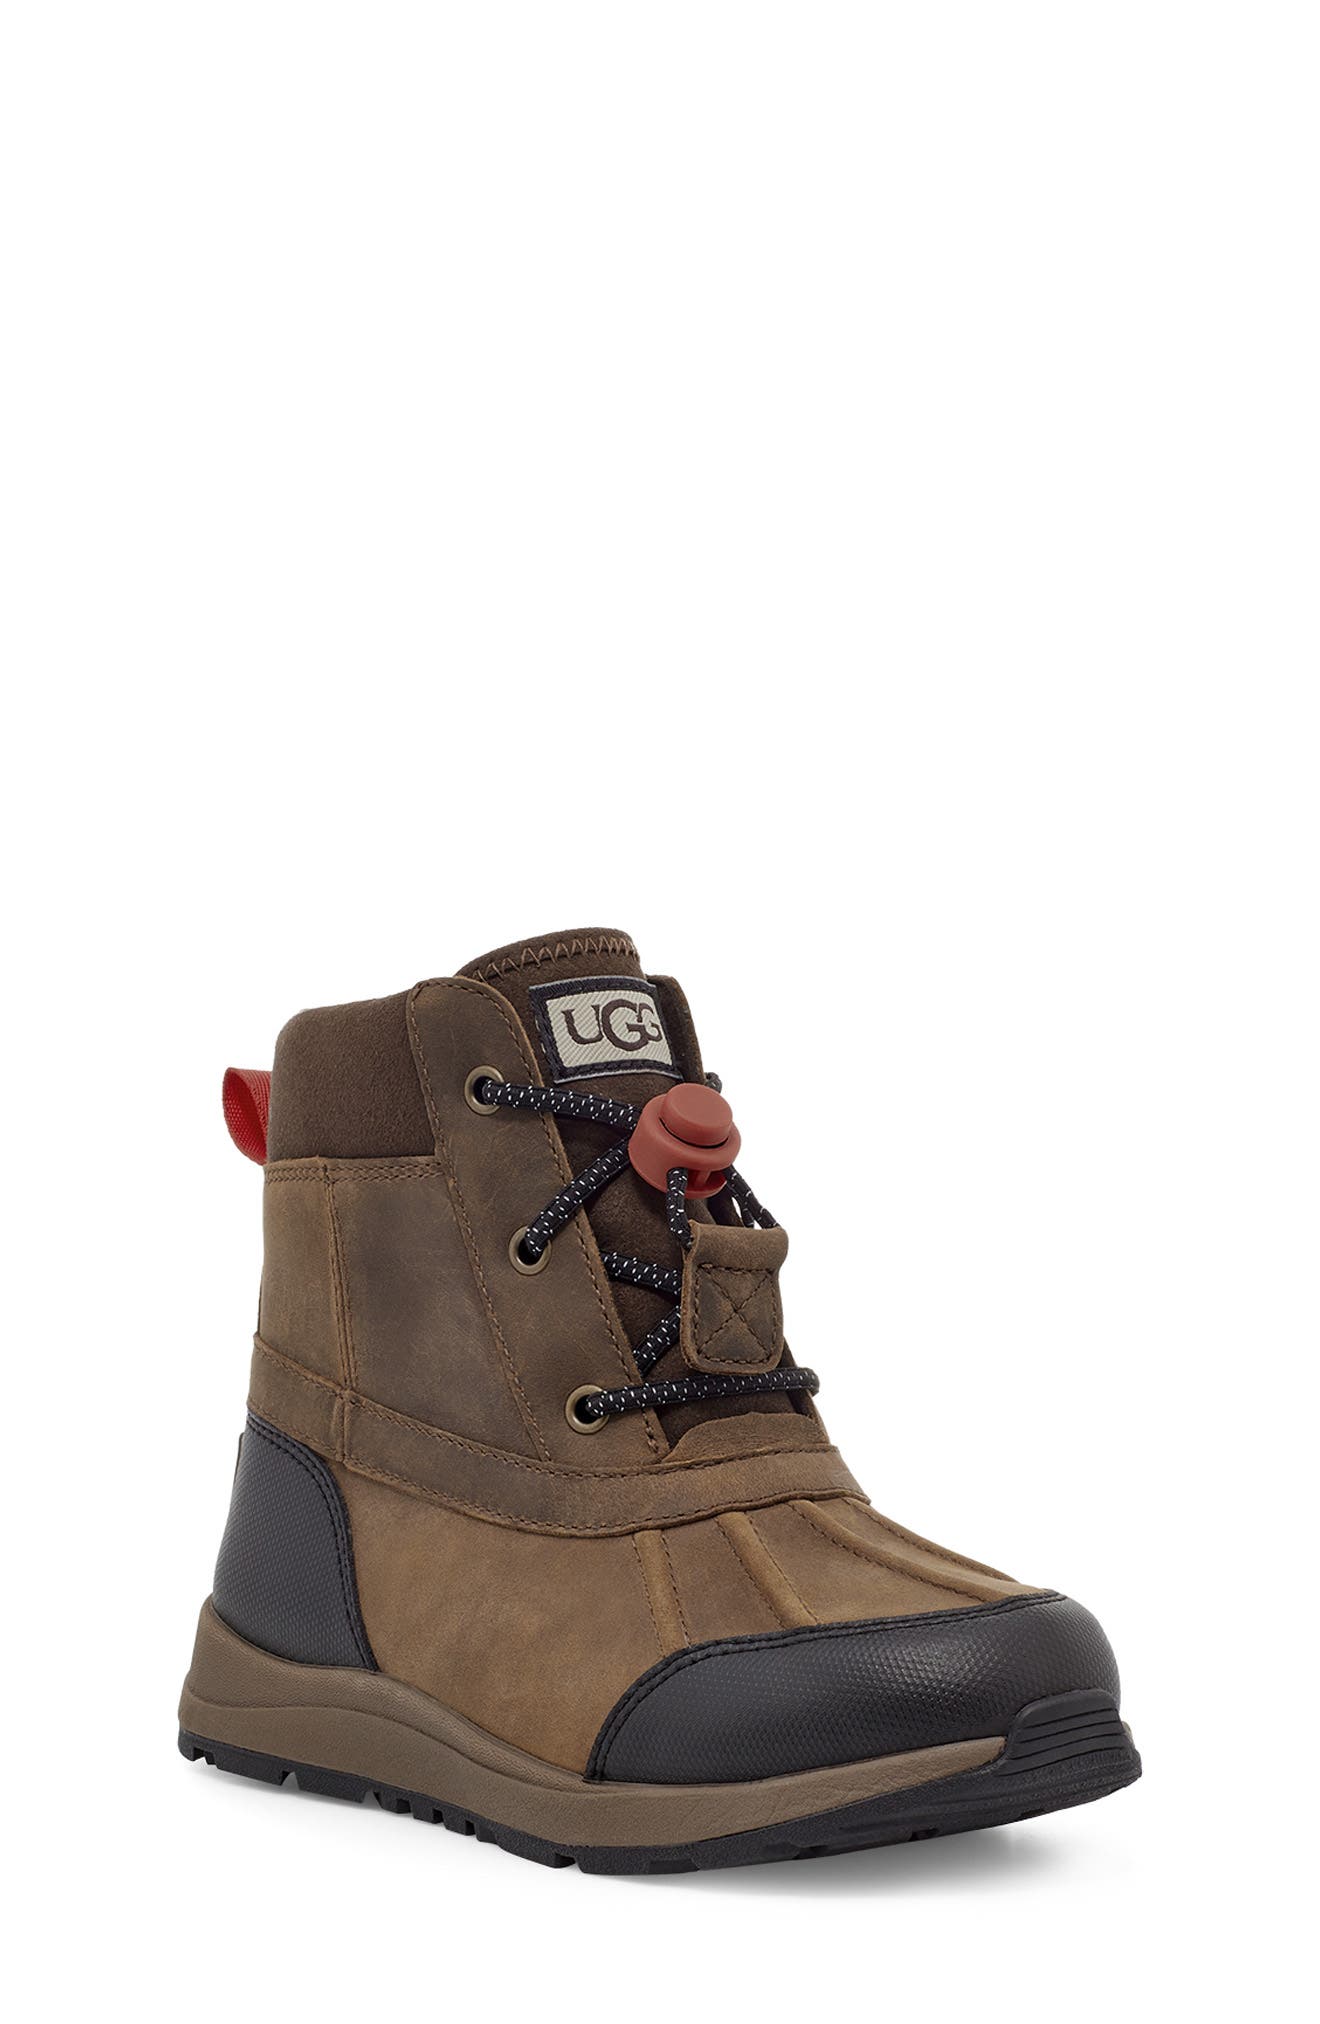 boys uggs shoes